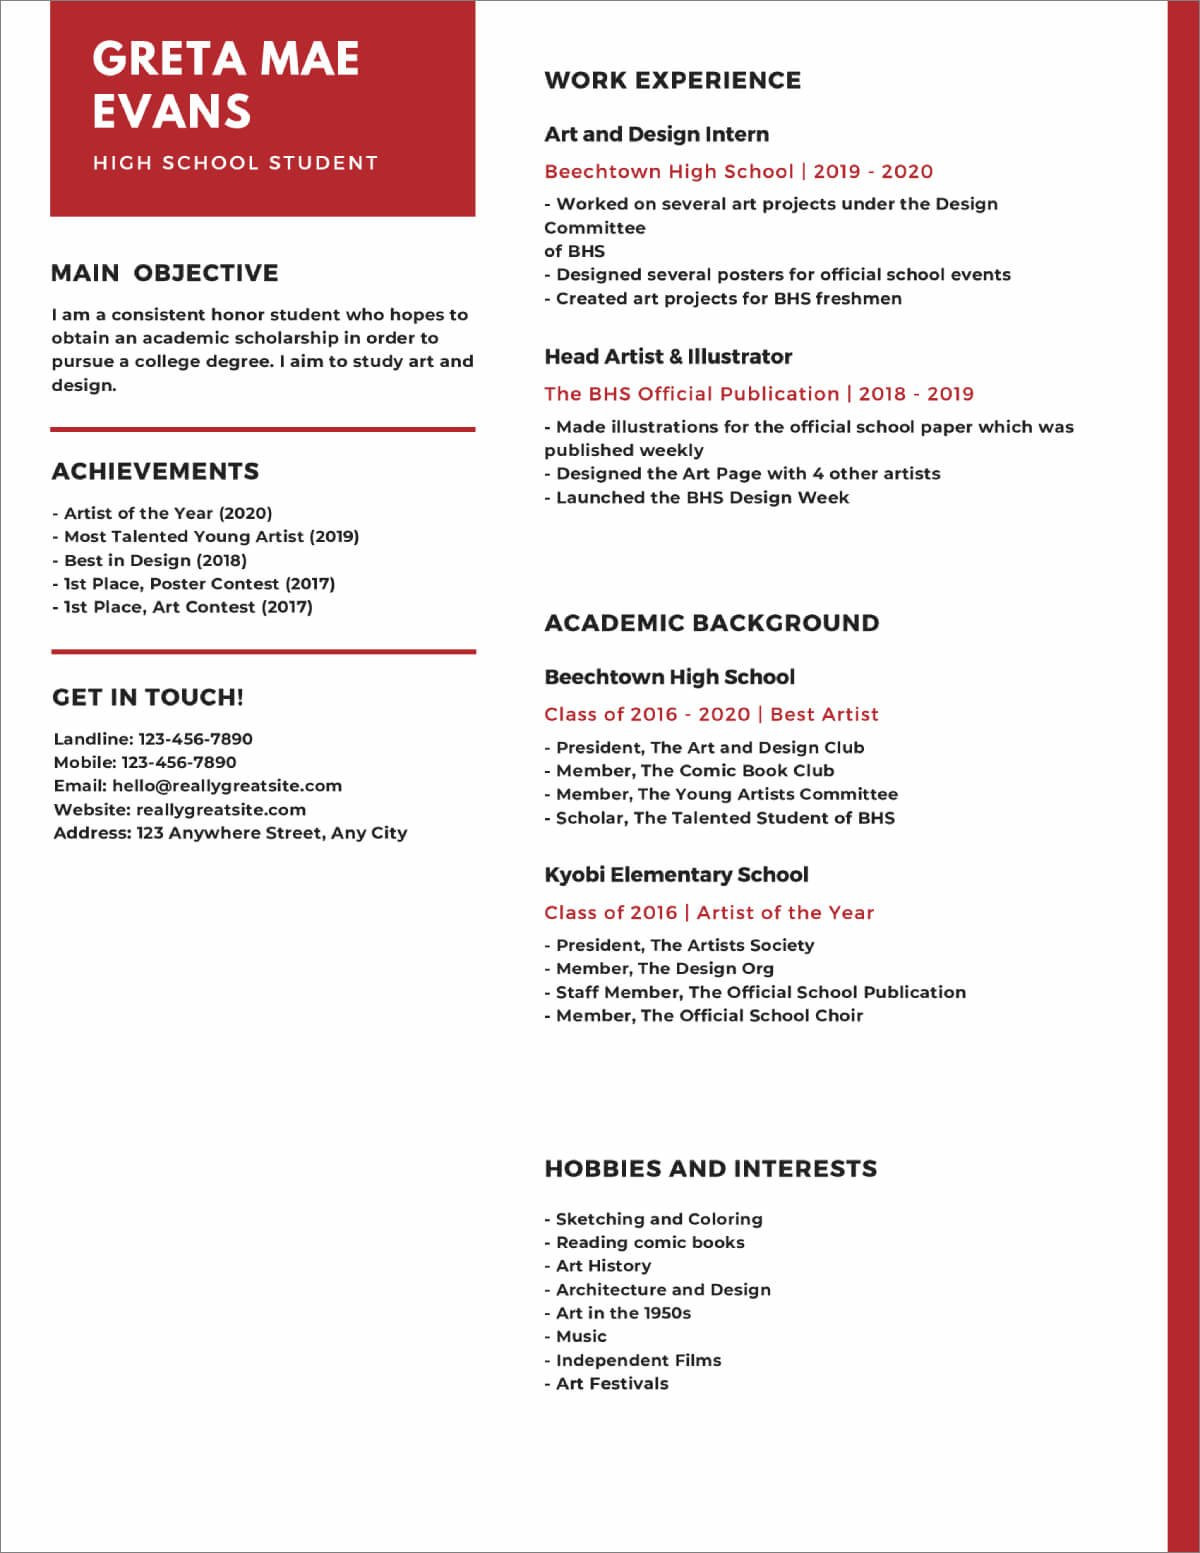 Resume for A High School Student Template 20lancarrezekiq High School Resume Templates [download now]